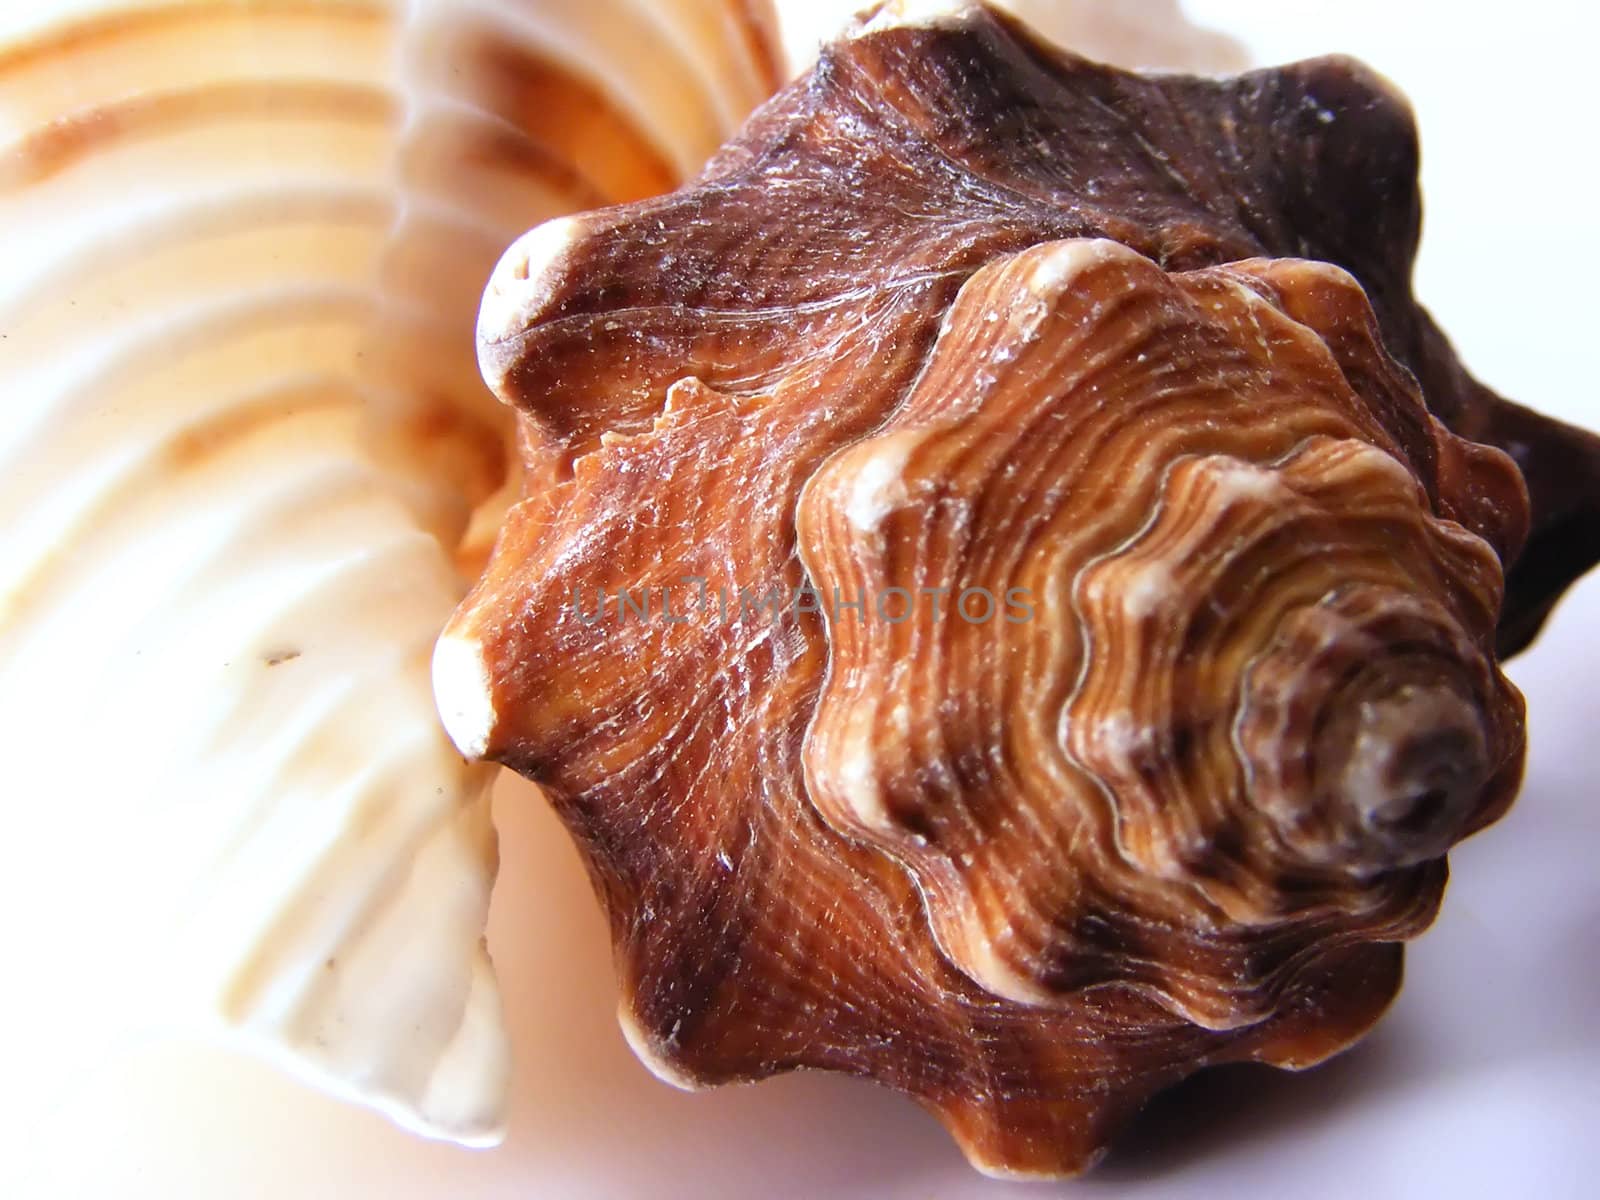 Macro of a cream colored seashell on a white background.